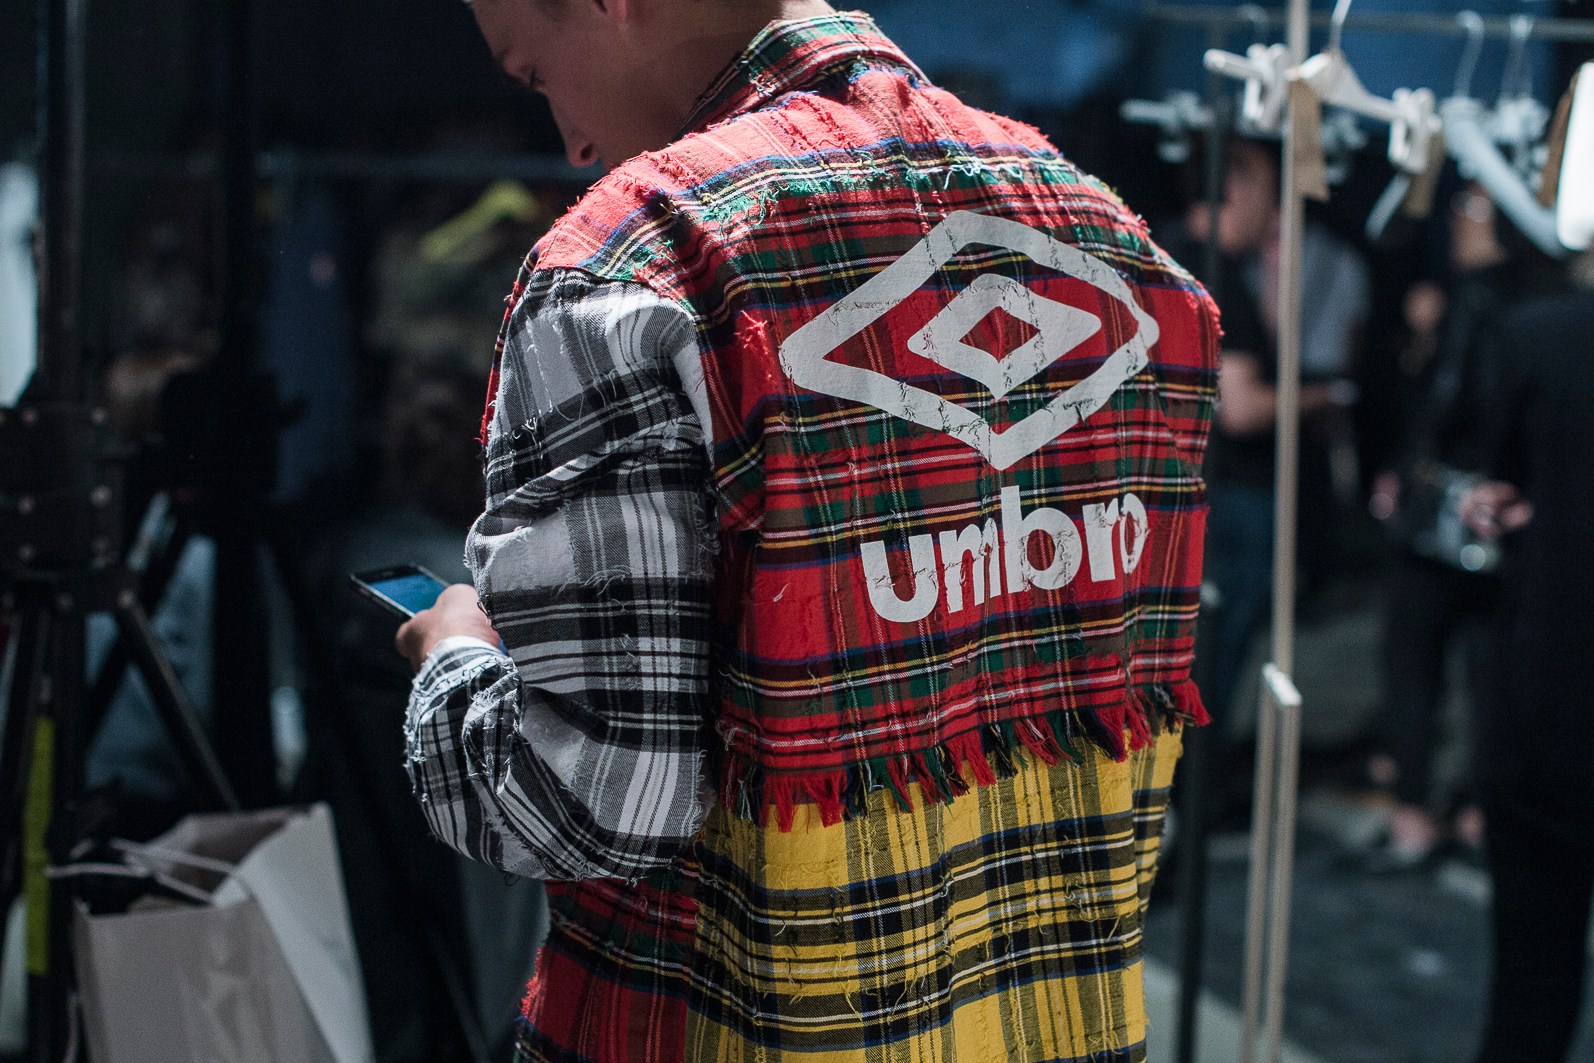 Virgil OFF-WHITE x Umbro Collaboration Is Available PAUSE Online Men's Fashion, Street Style, Fashion News & Streetwear